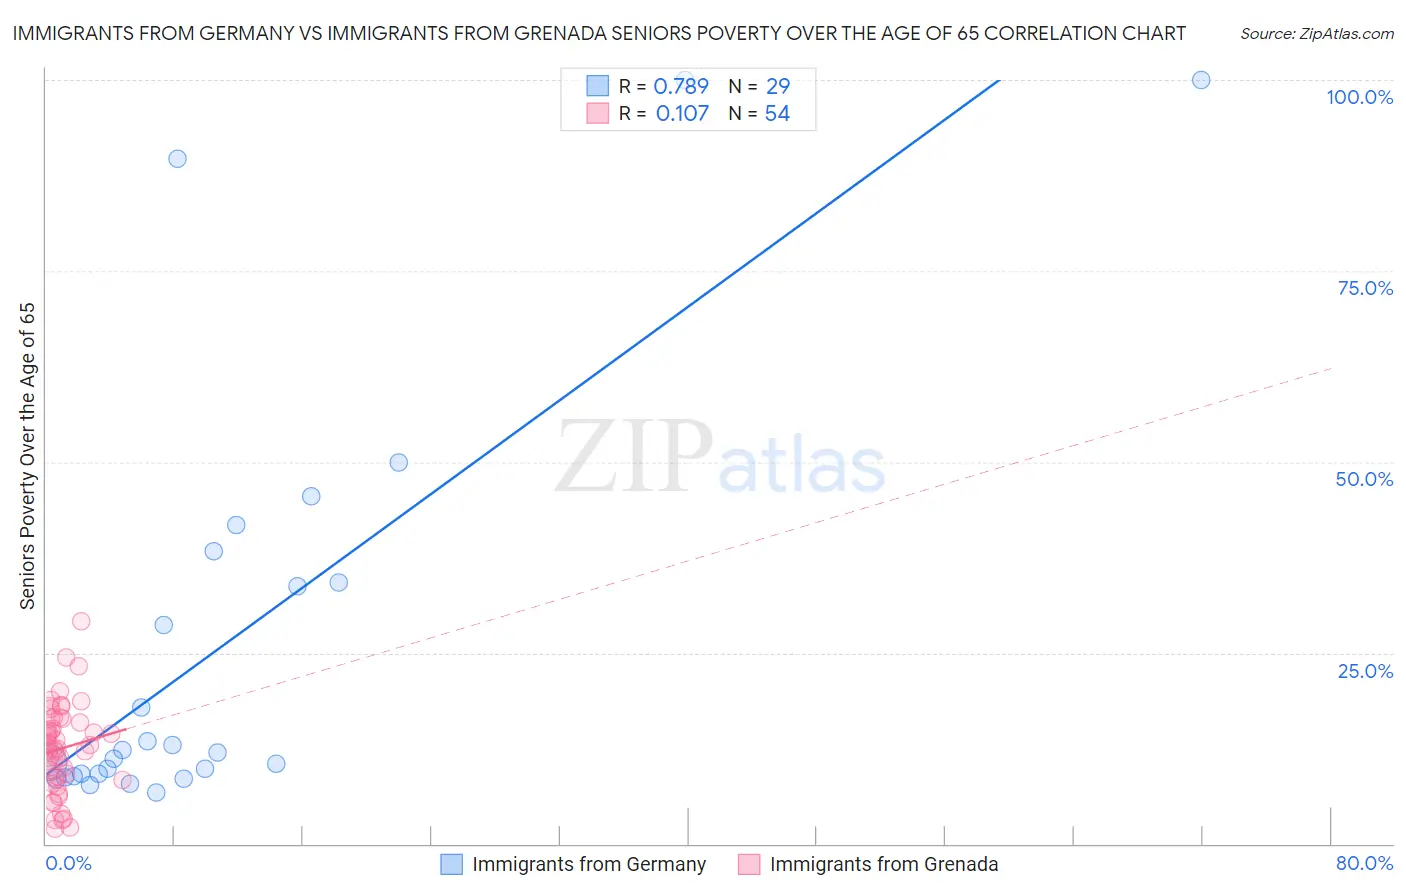 Immigrants from Germany vs Immigrants from Grenada Seniors Poverty Over the Age of 65